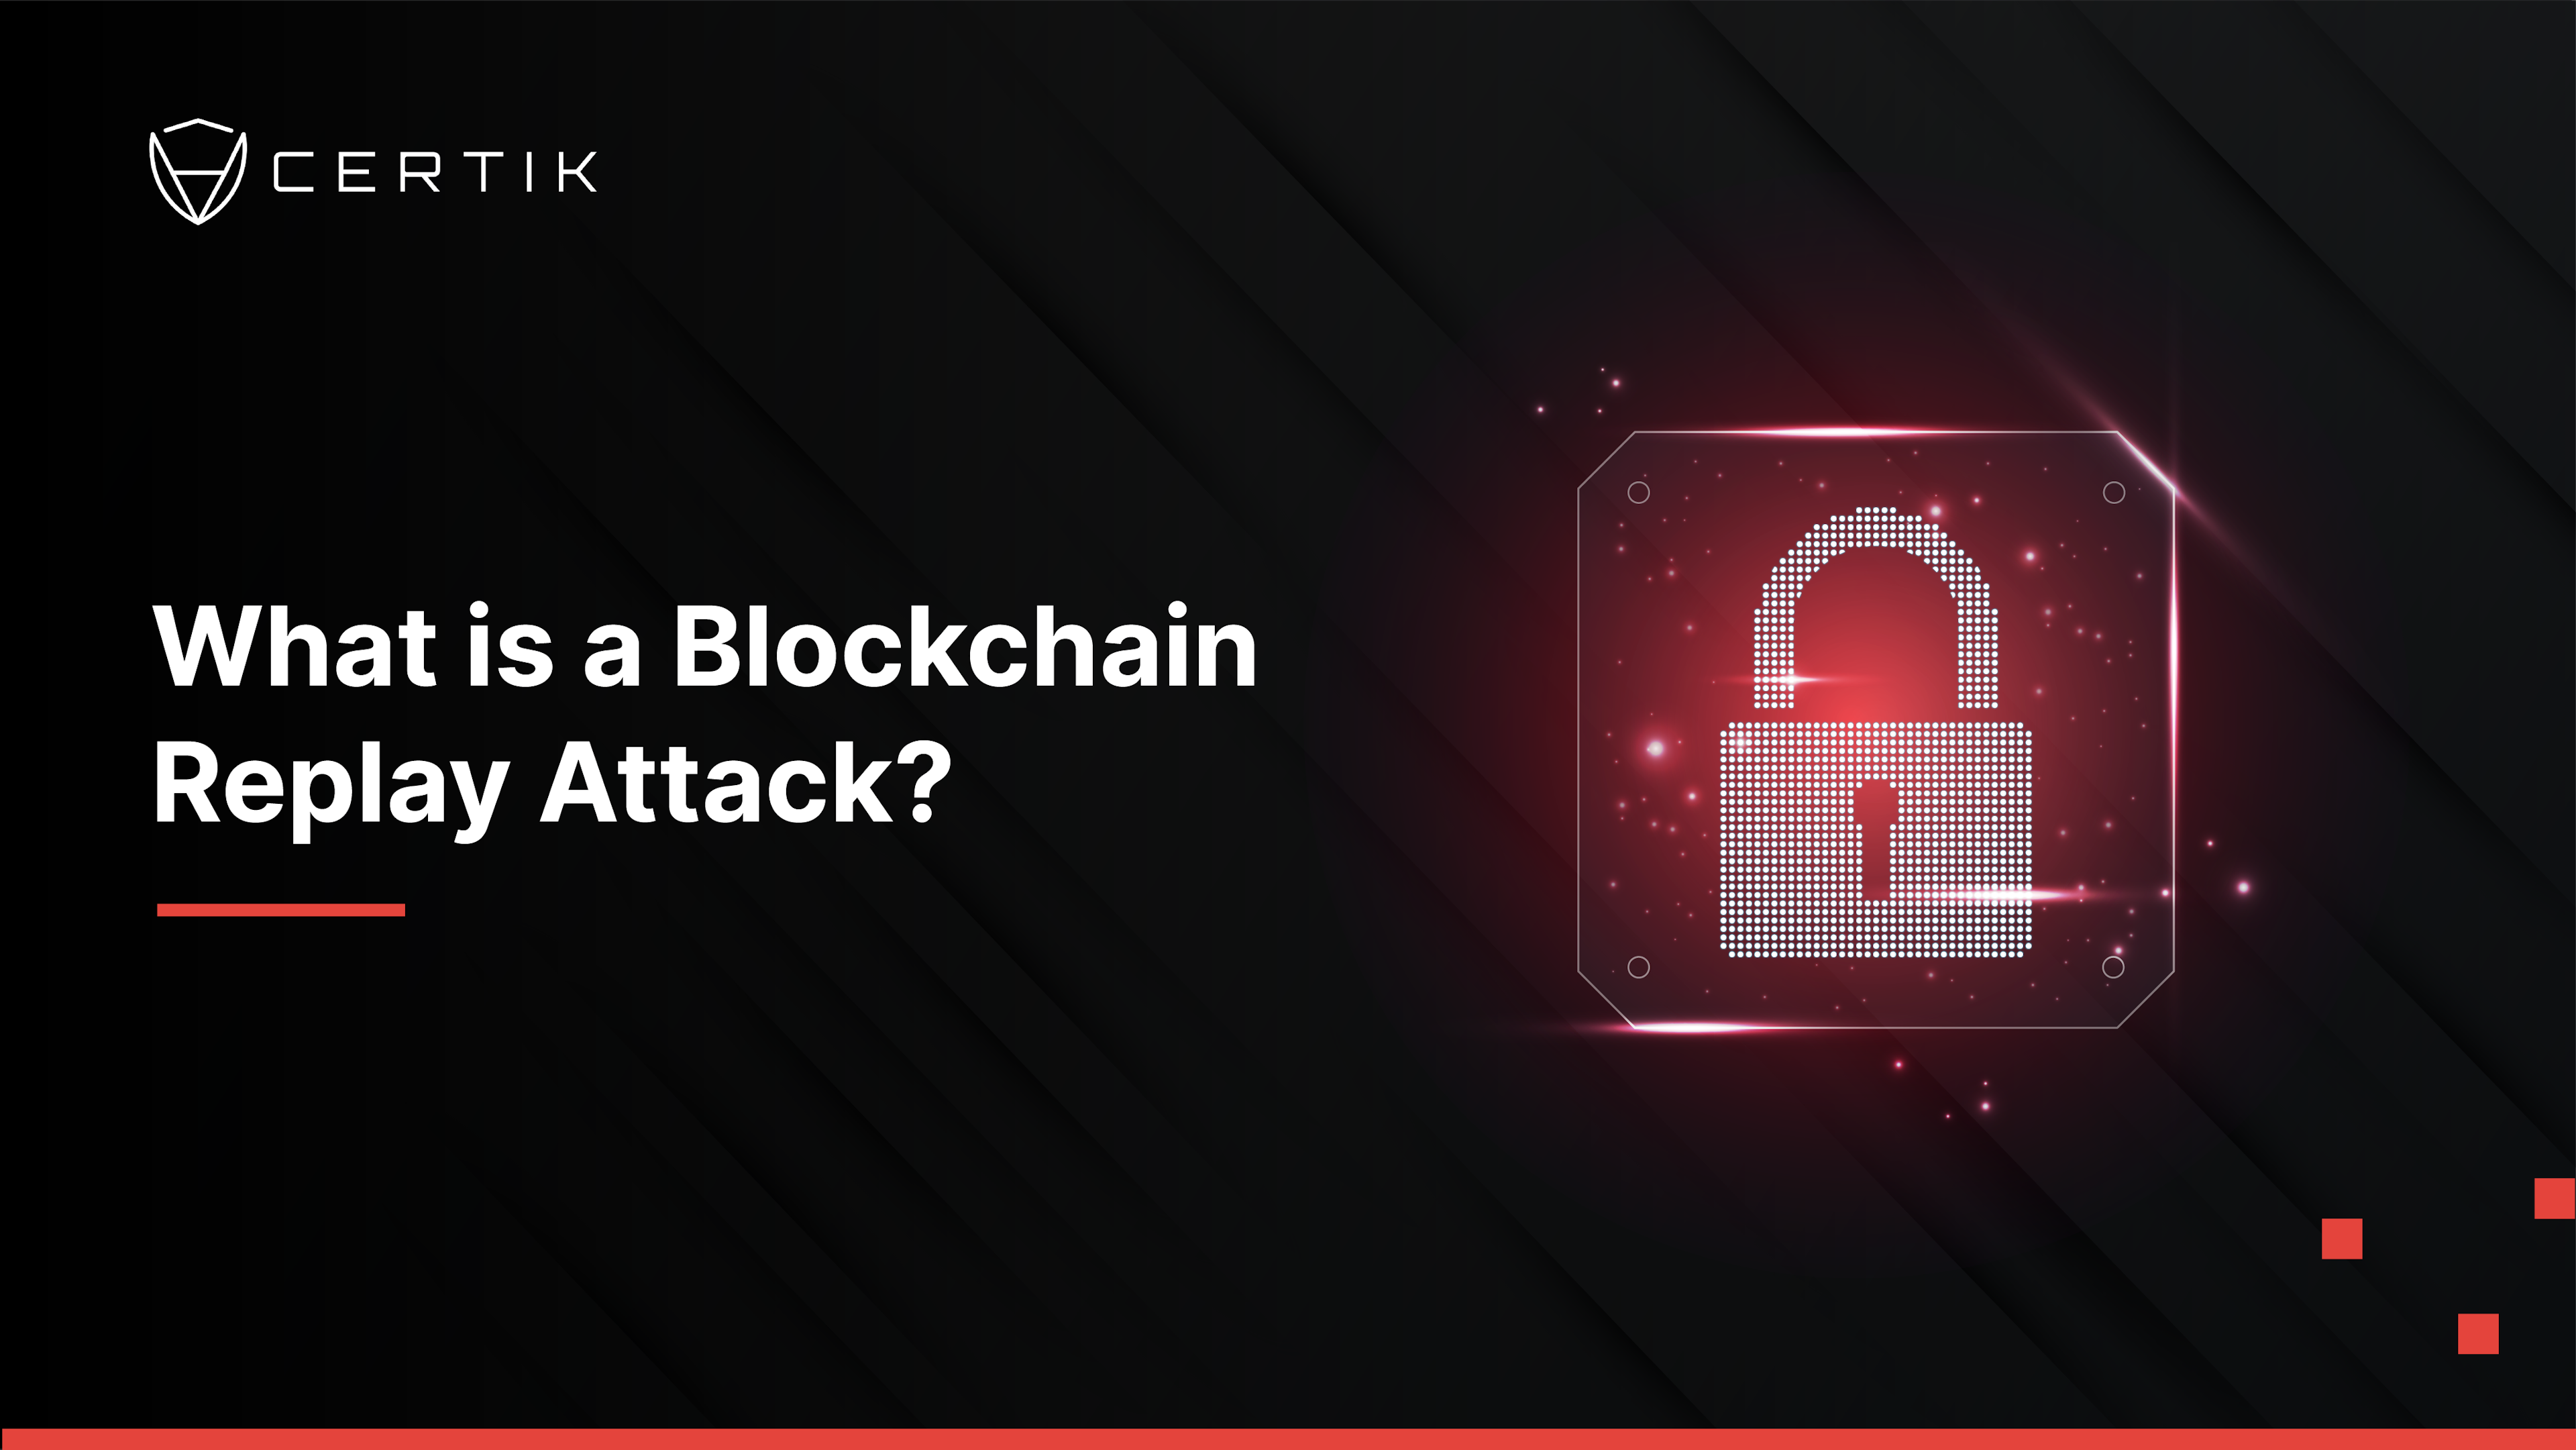 What is a Blockchain Replay Attack?